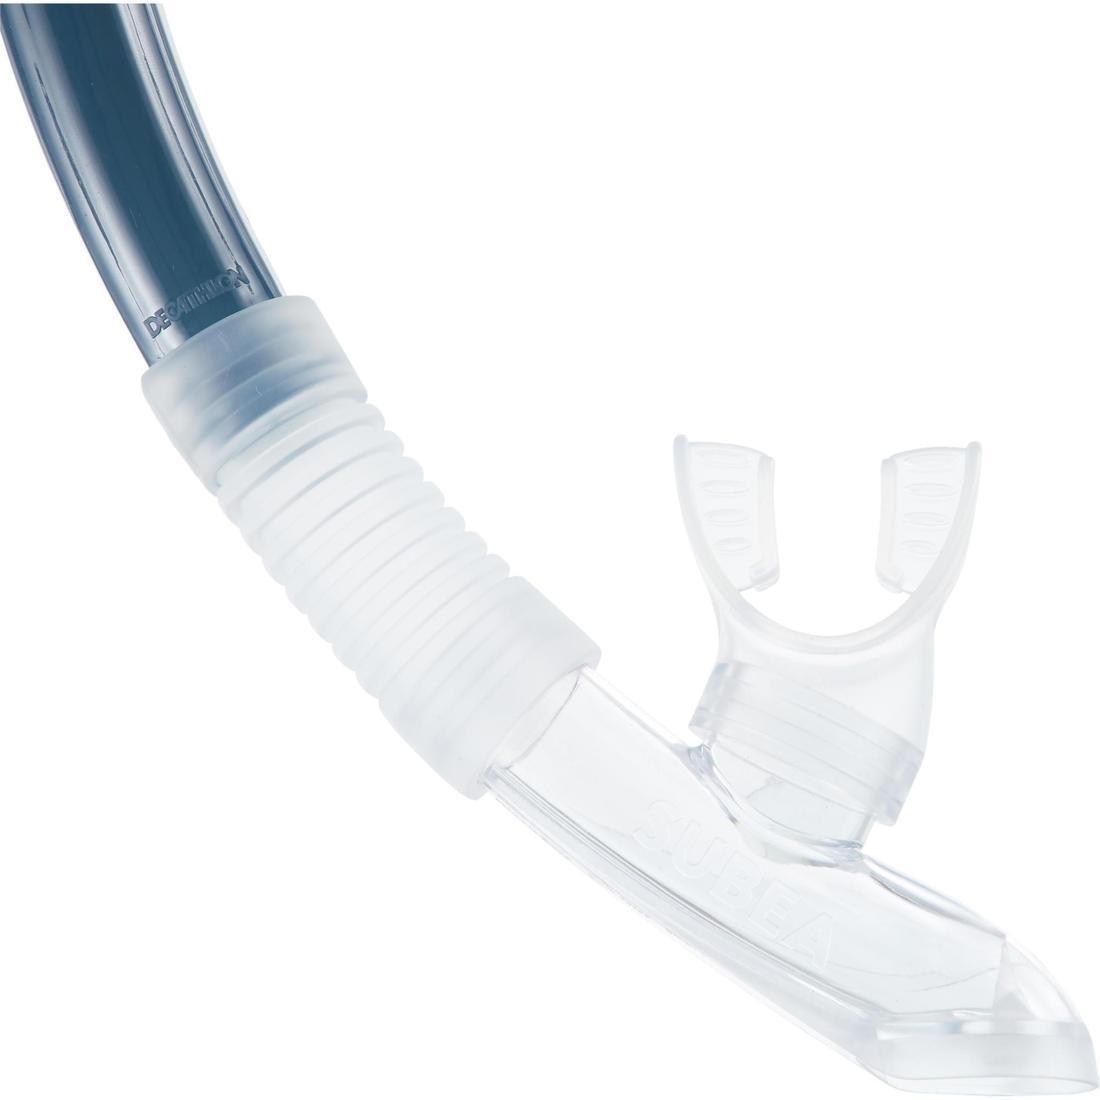 SUBEA - Diving Snorkel With Valve 100, Grey